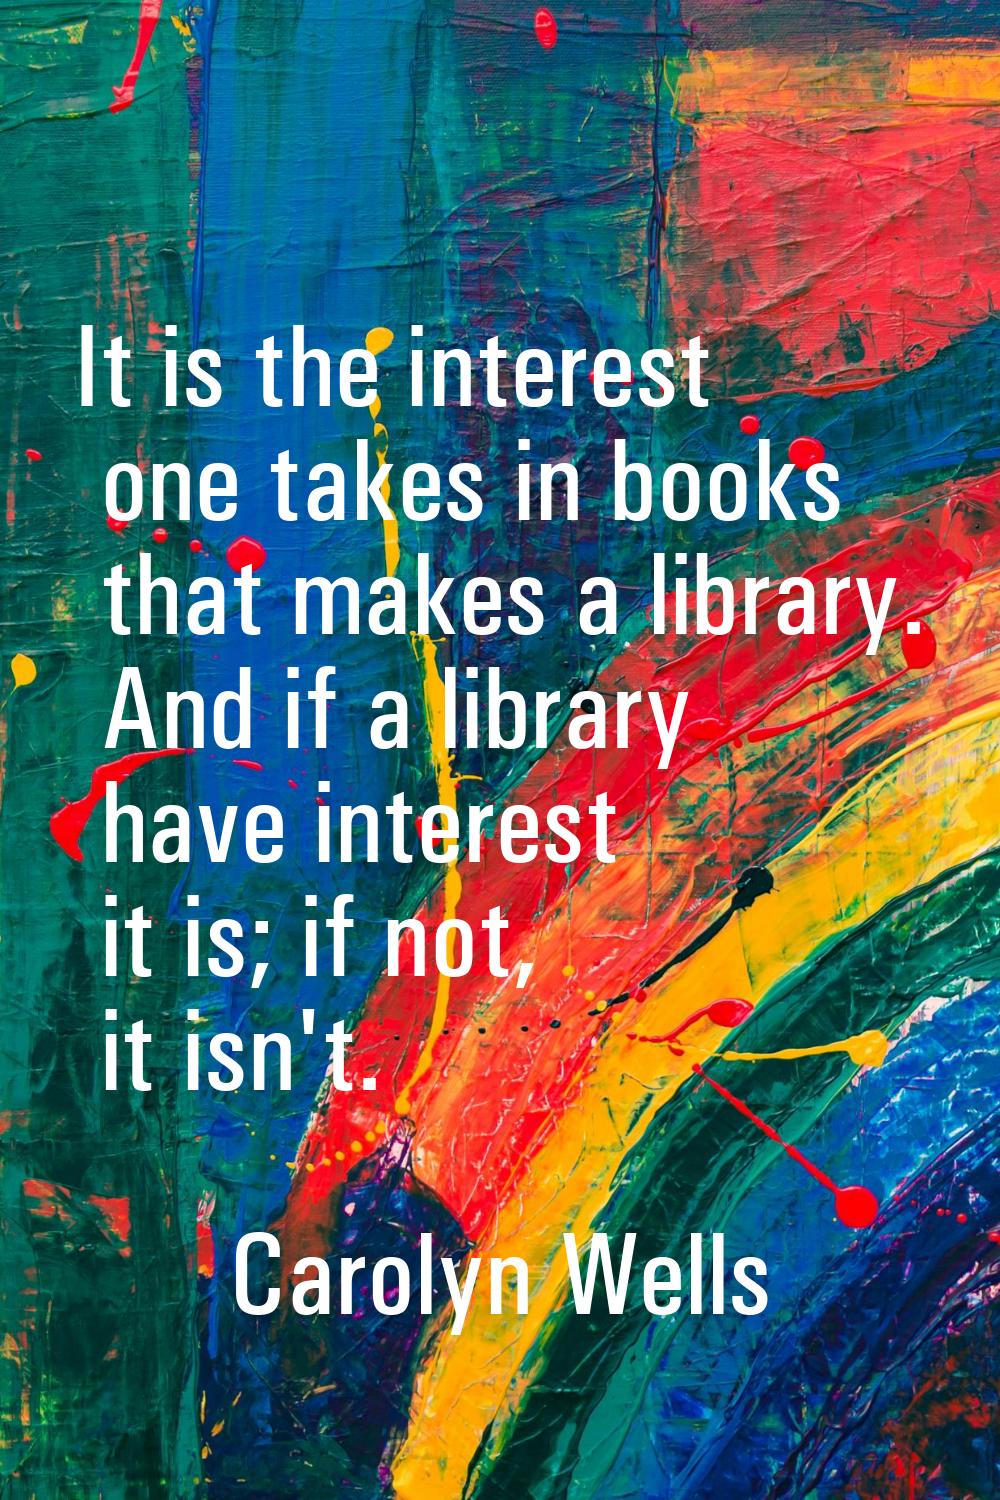 It is the interest one takes in books that makes a library. And if a library have interest it is; i